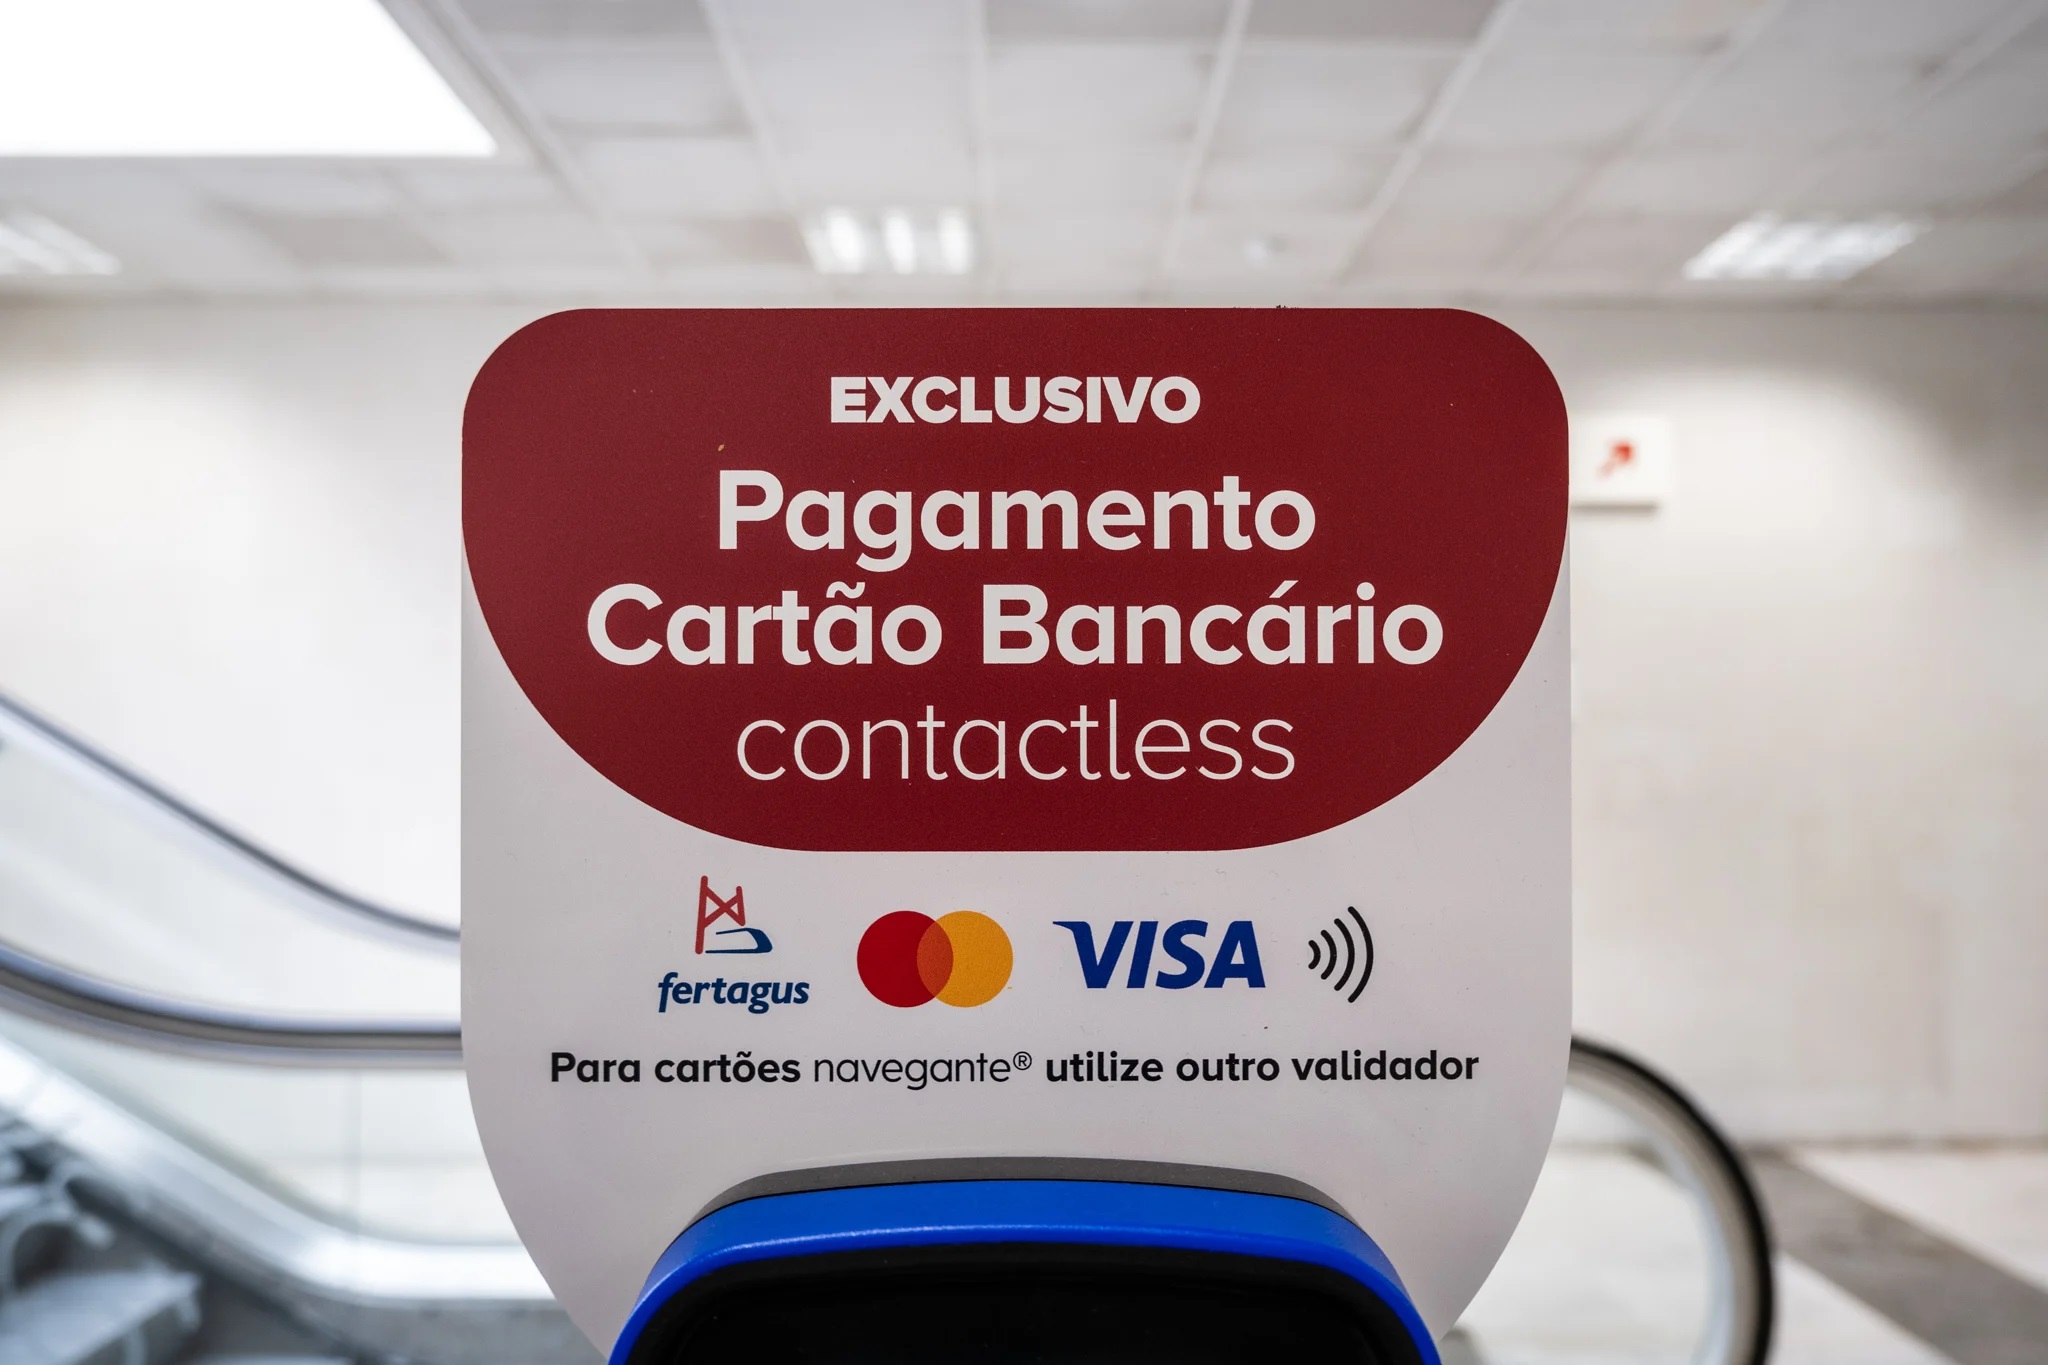 Open loop payment in Lisbon: interview with rail operator Fertagus